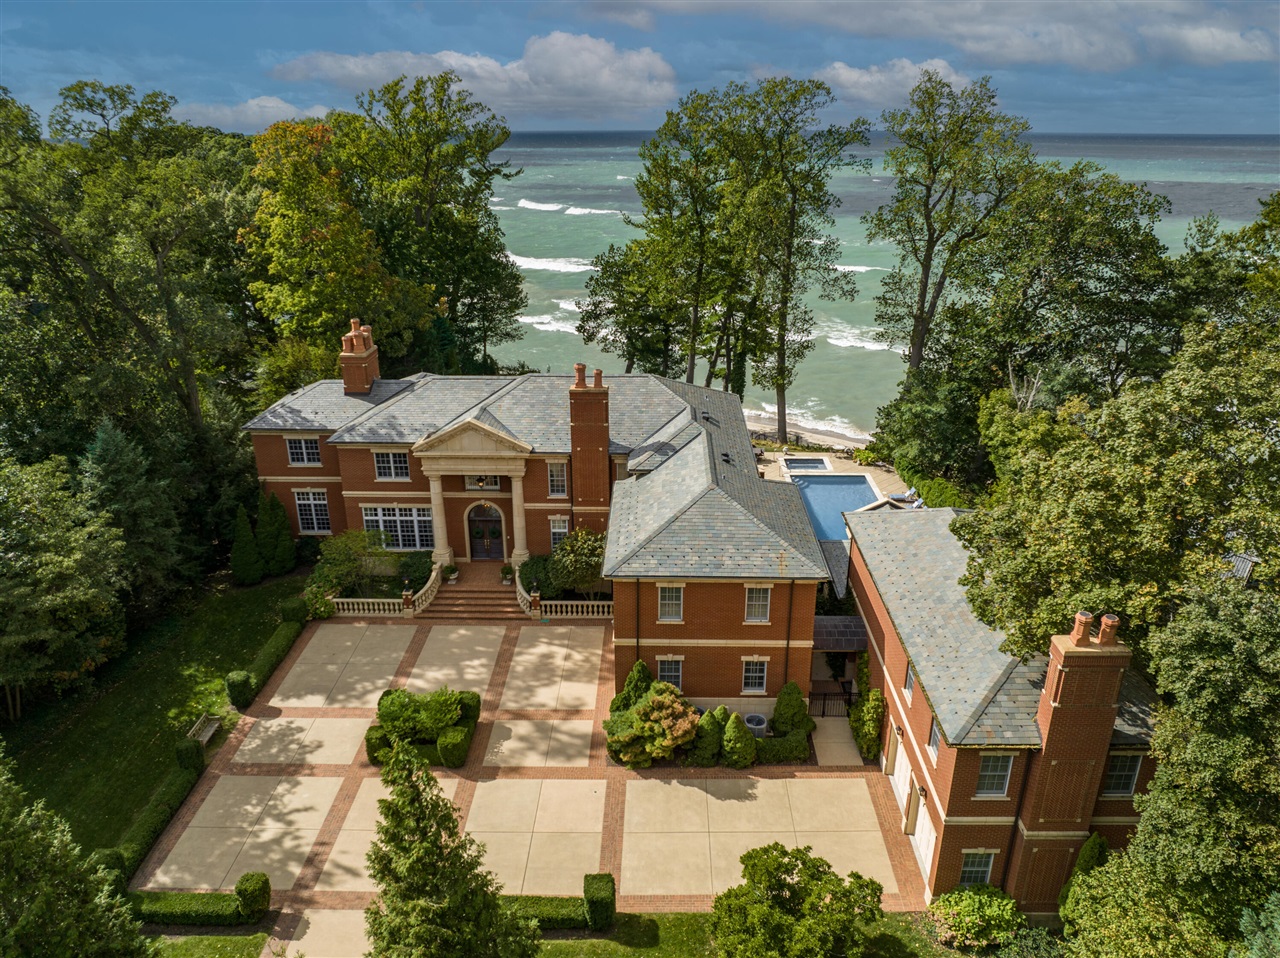 Magnificent 11,000+ sq. ft. stately Georgian estate situated on 148' of breathtaking Lake Michigan frontage. 40' swimming pool & spa overlooks huge sandy riparian beach. Unparalleled quality construction and state-of-the-art amenities in this 9 bedroom, 13 bath home. Richly paneled library & office with coffered ceilings, family room with wet bar & wine cellar, beautiful gallery with arched French doors opening on to a large stone terrace overlooking the lushly landscaped yard & lake. Primary suite with fireplace, 2 full baths, office/sitting room & screened porch. Enjoy cozy evenings in front of one of the 9 fireplaces. Amenities include a 4 bedroom attached guest house, radiant heated floors, home theater, exercise room, 4 car heated garage, lakefront fire pit & generator.